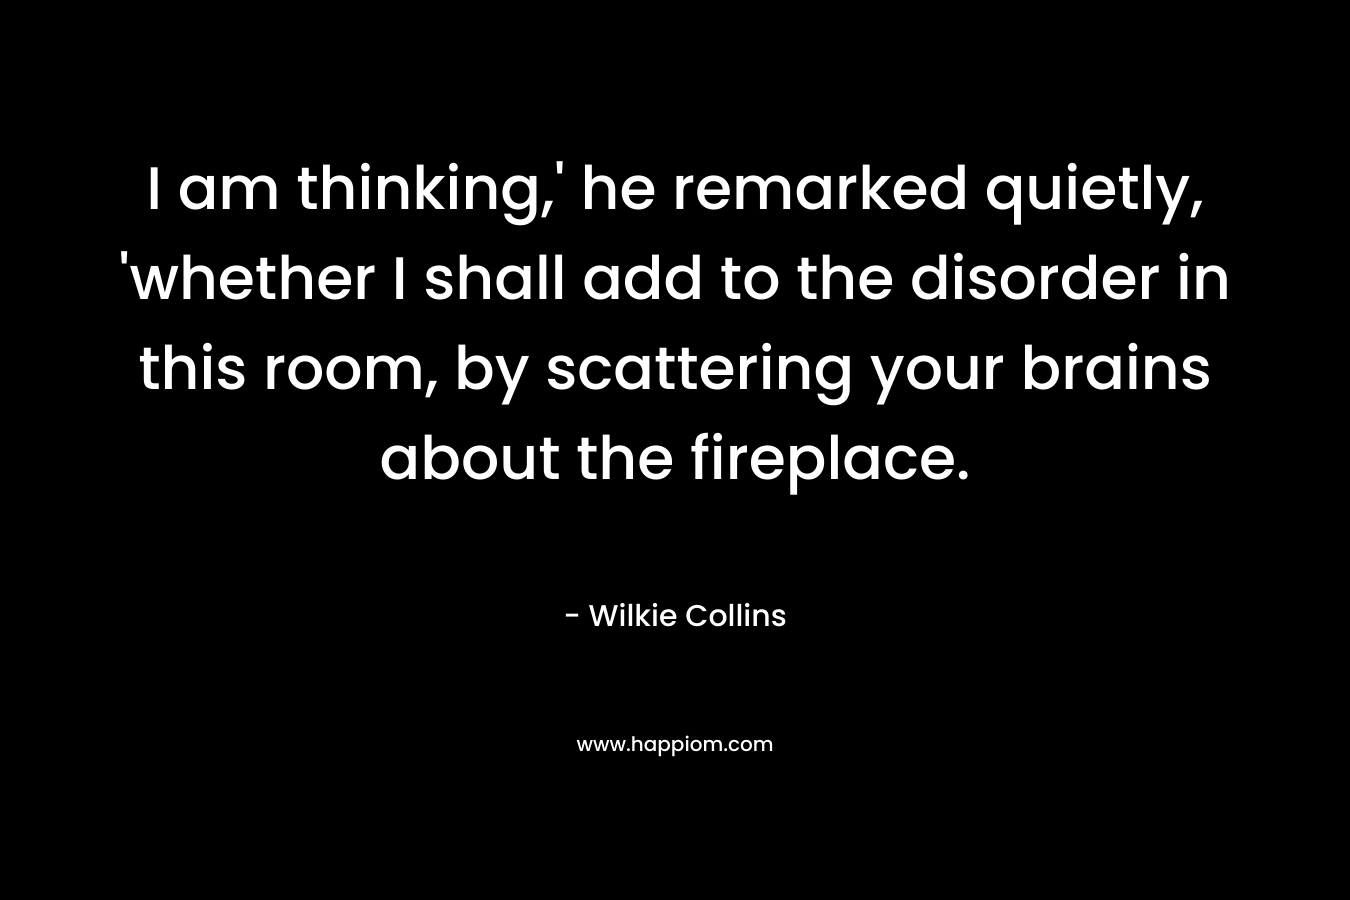 I am thinking,' he remarked quietly, 'whether I shall add to the disorder in this room, by scattering your brains about the fireplace.